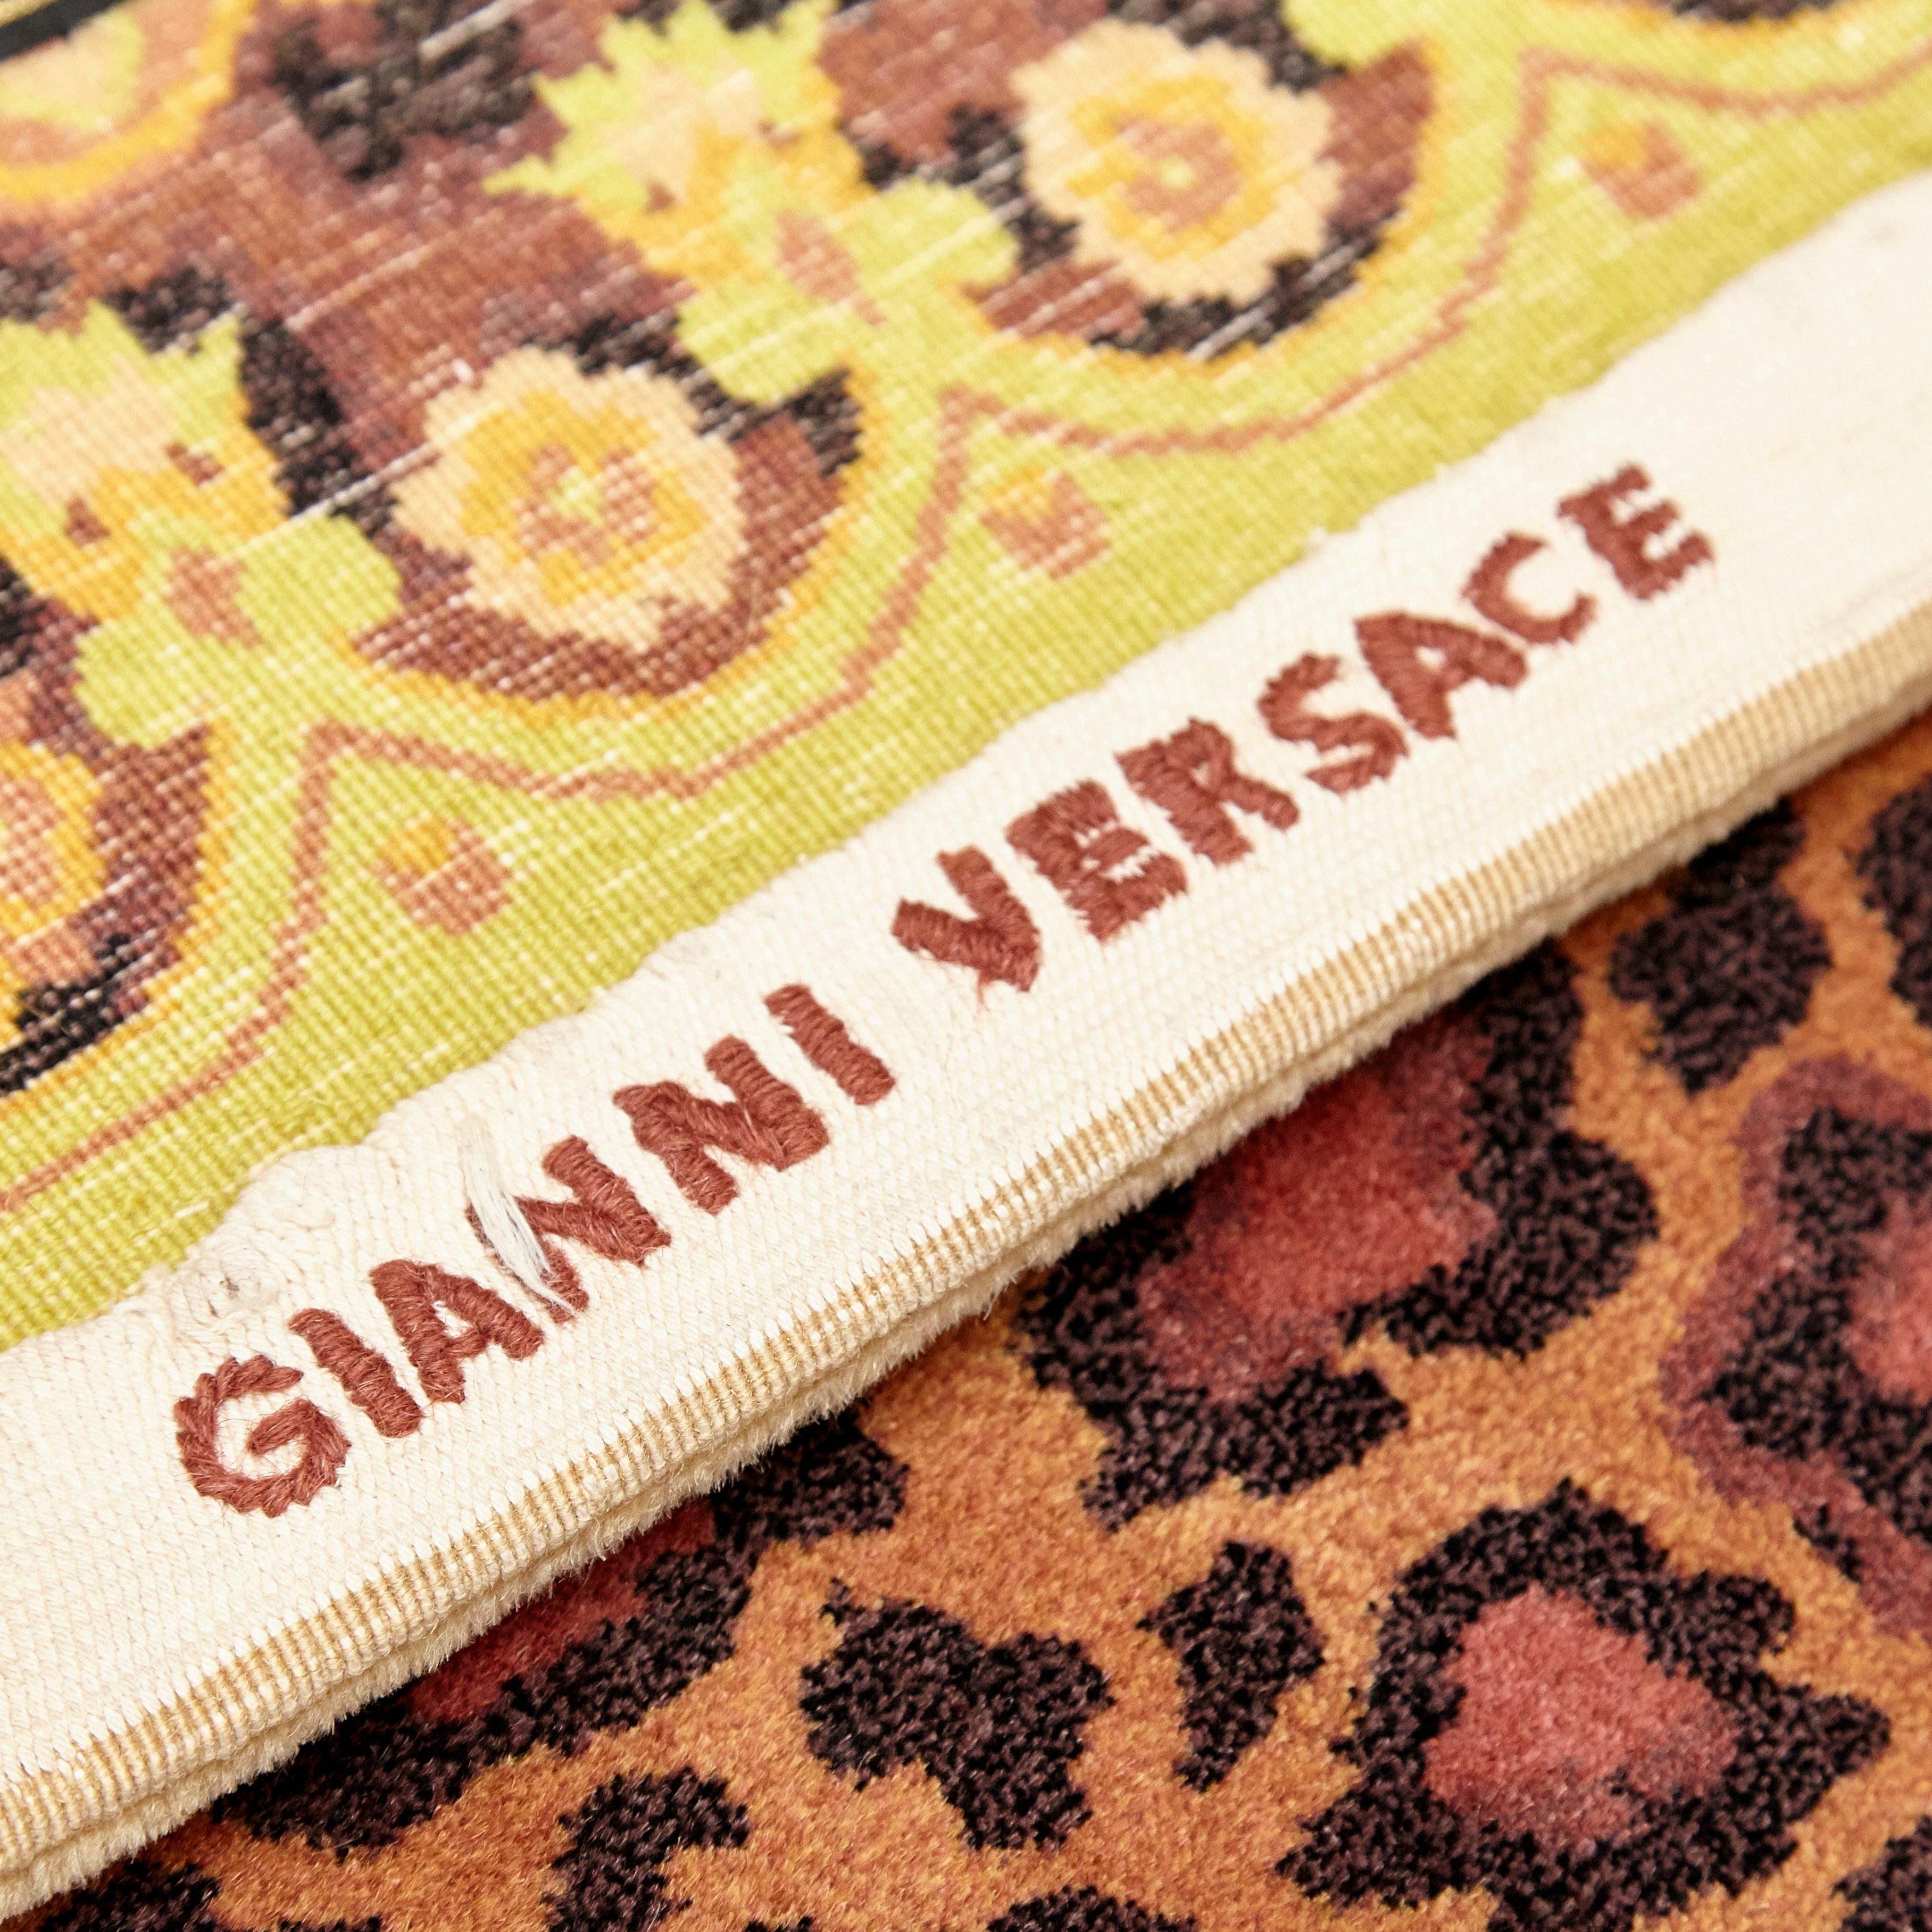 Gianni Versace Collection Rug Wild Barocco, Gold Leopard Animal Print, 1980 2